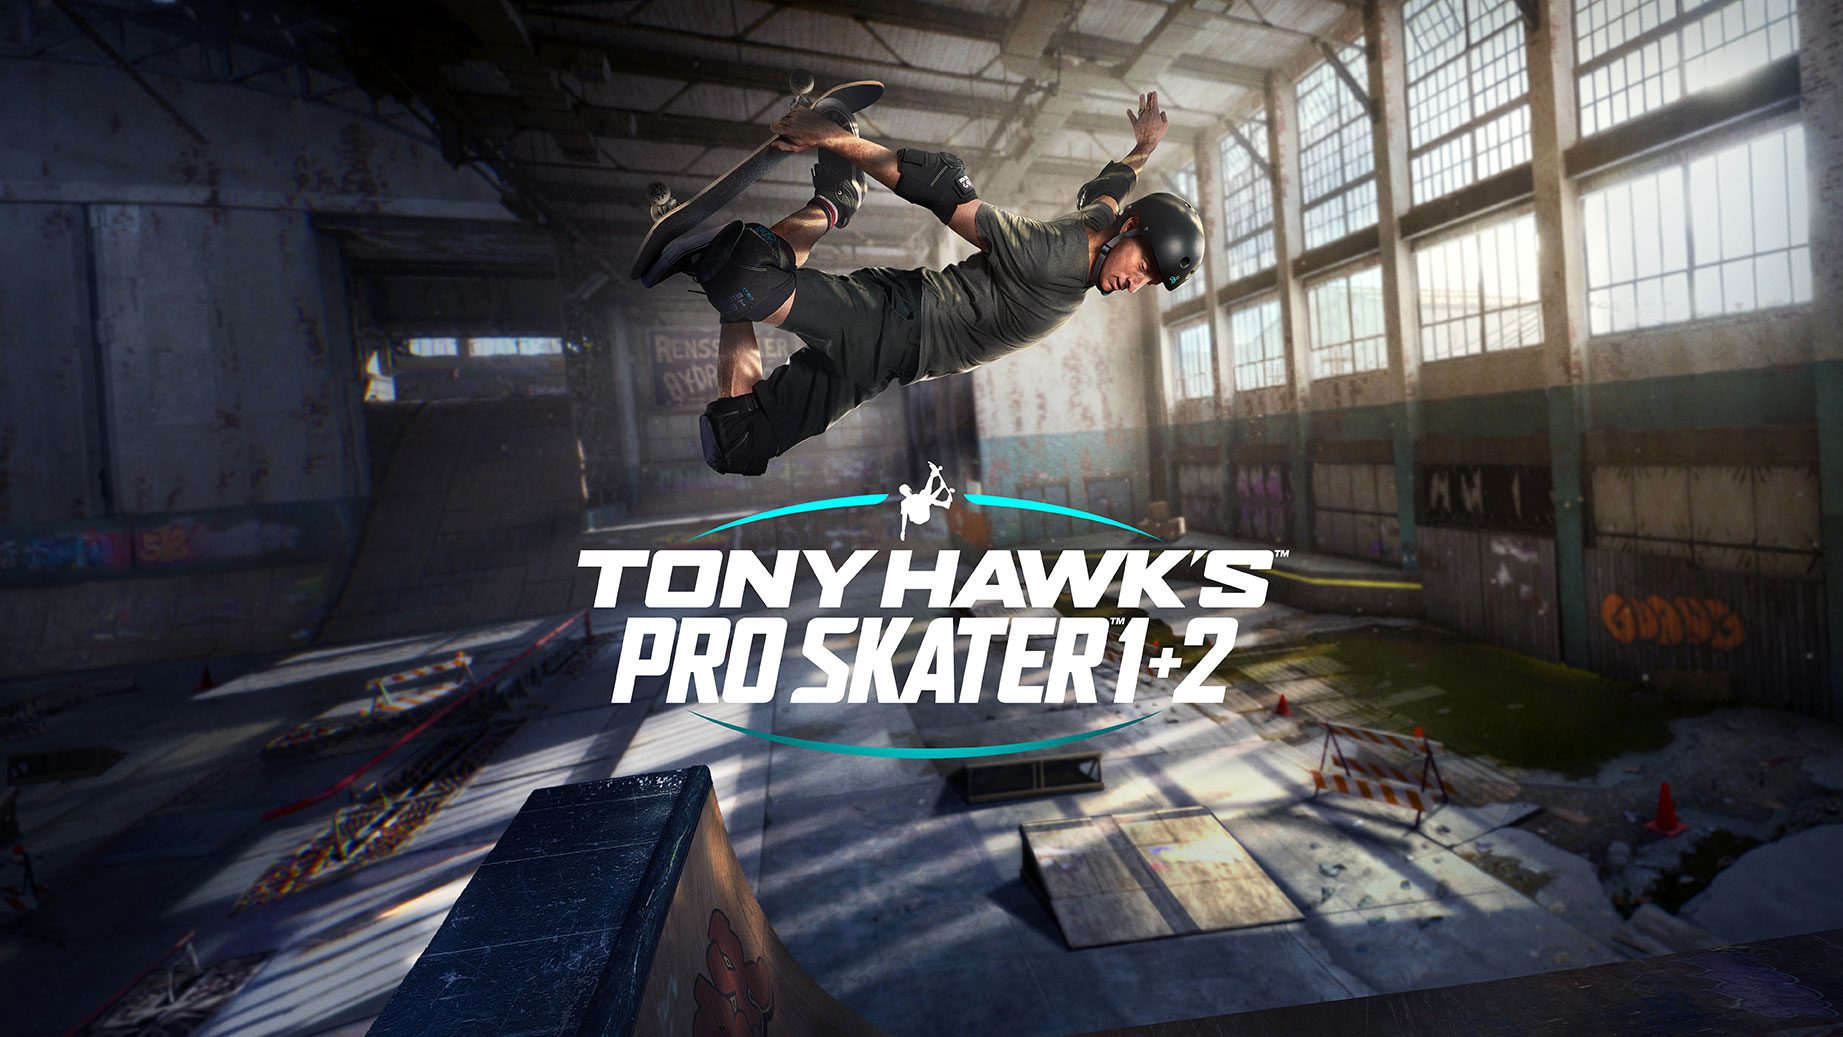 Tony Hawk’s Pro Skater 1 & 2 remasters won’t have microtransactions unless fans want them